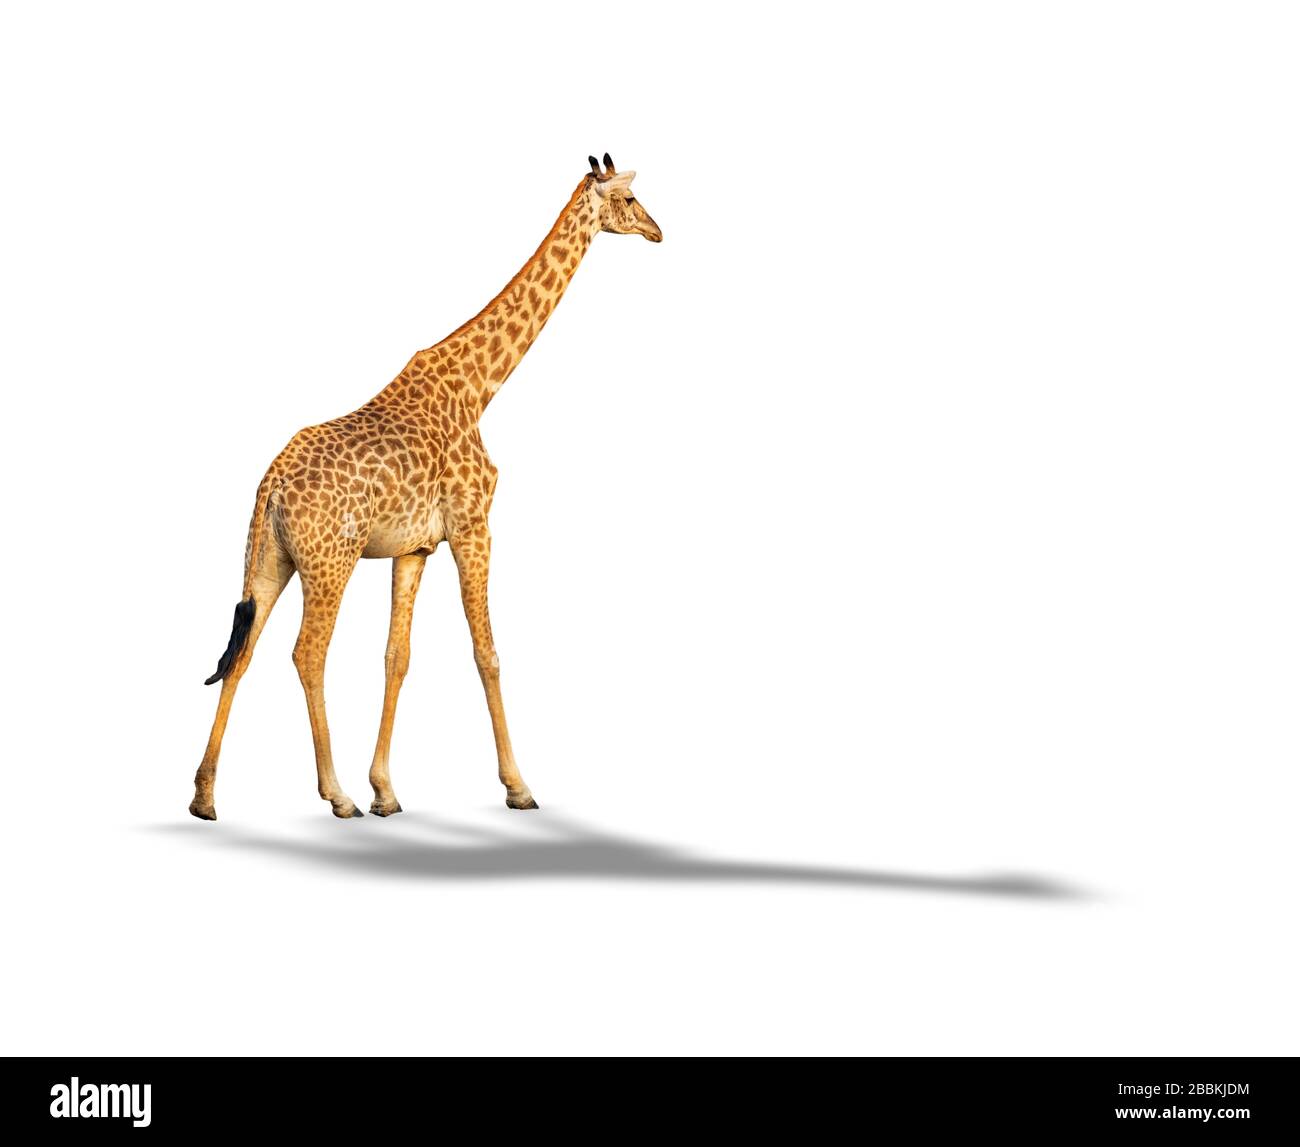 Giraffe walking isolated on white background with shadow Stock Photo